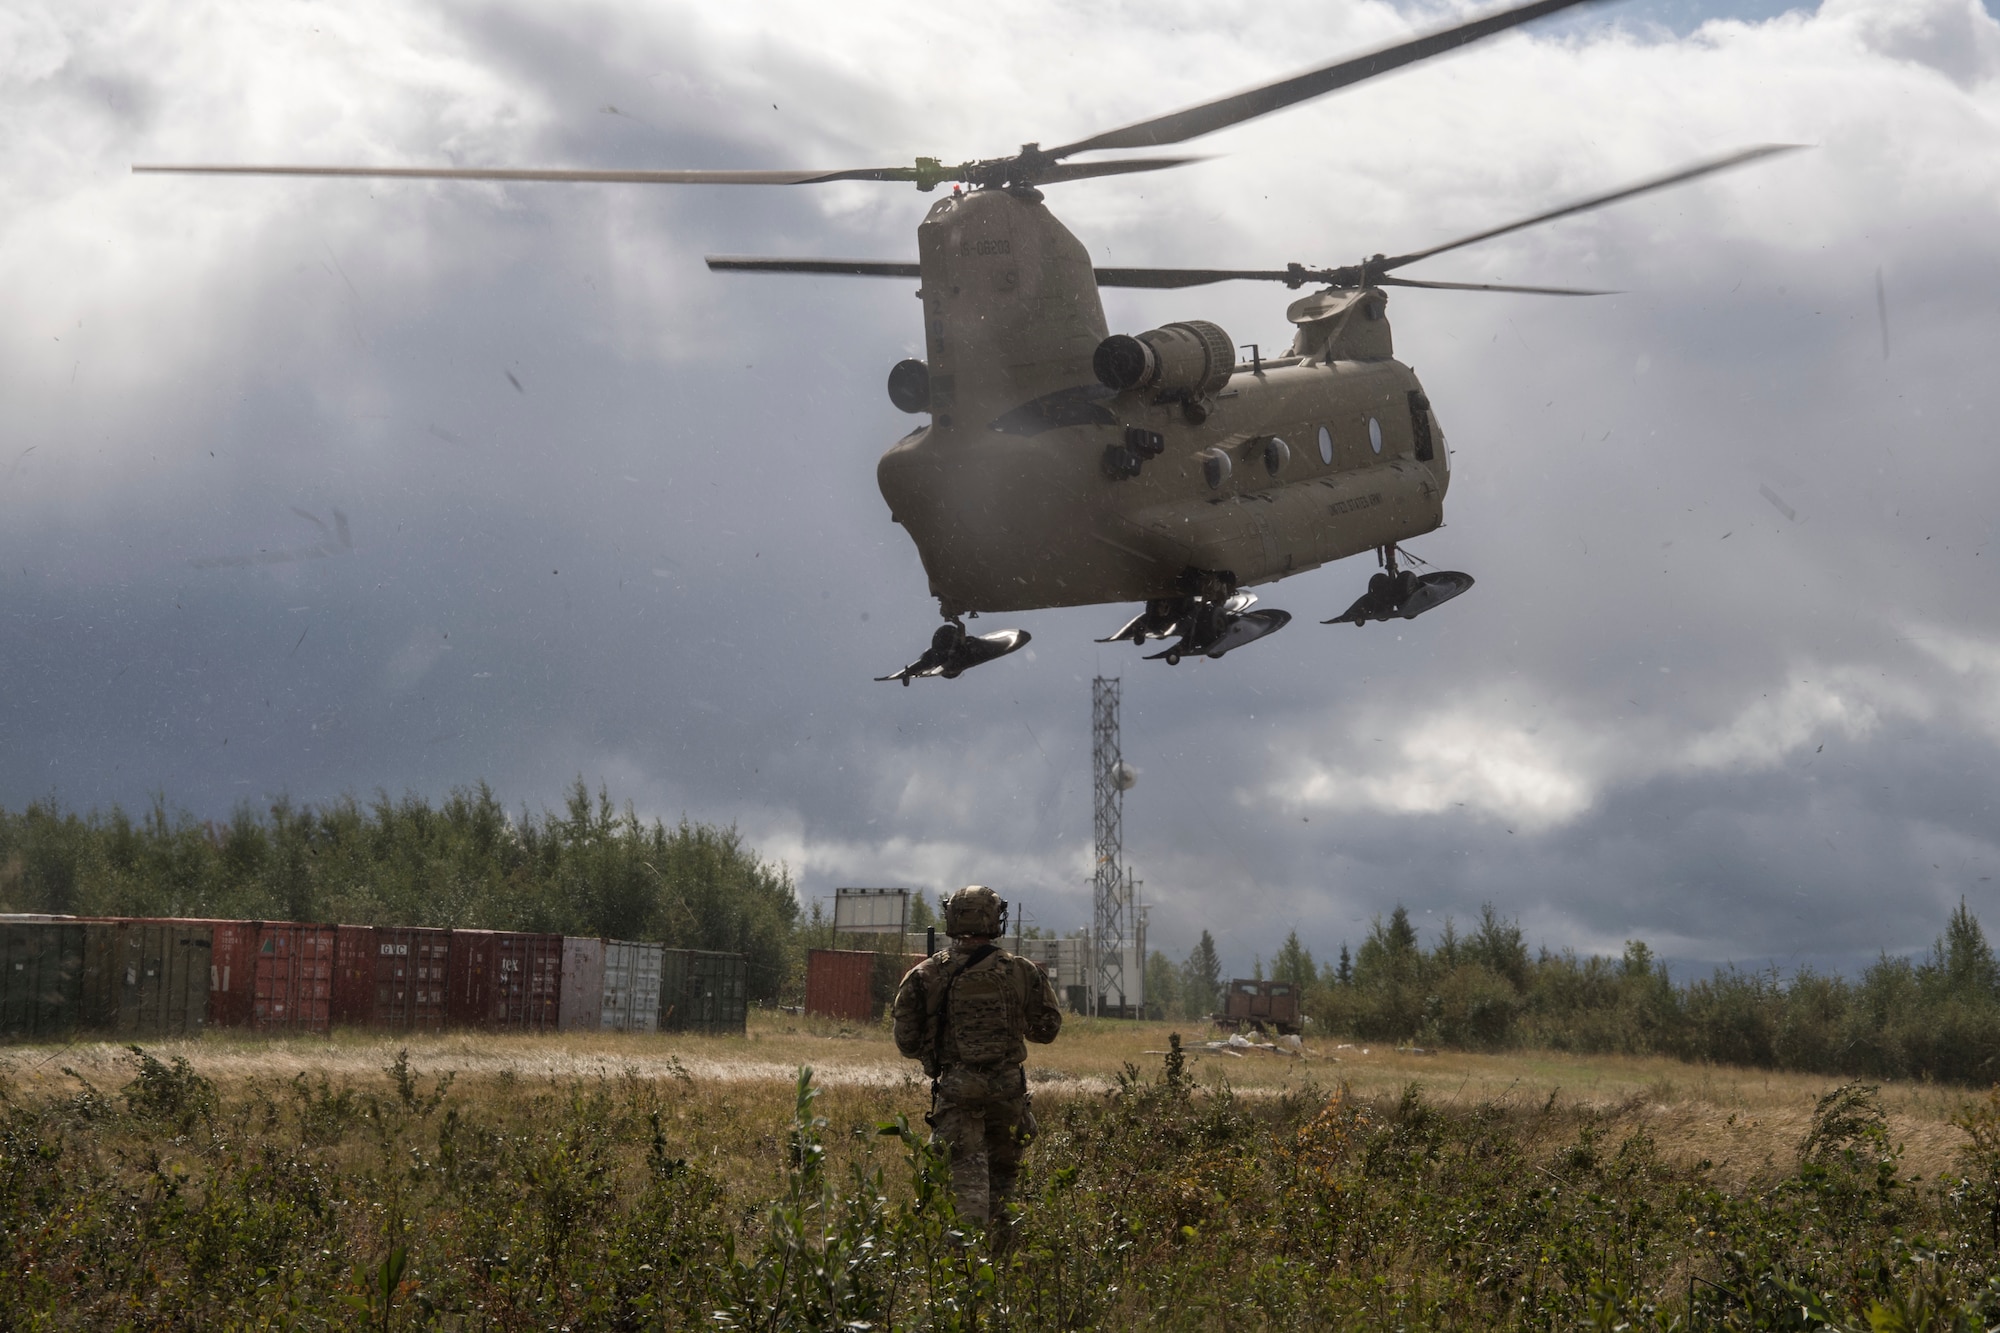 A Special Tactics Airman with the 17th Special Tactics Squadron watches as a U.S. Army CH-47 Chinook prepares to land during RED FLAG-Alaska 18-3 at Eielson Air Force Base, Alaska, Aug. 16, 2018.